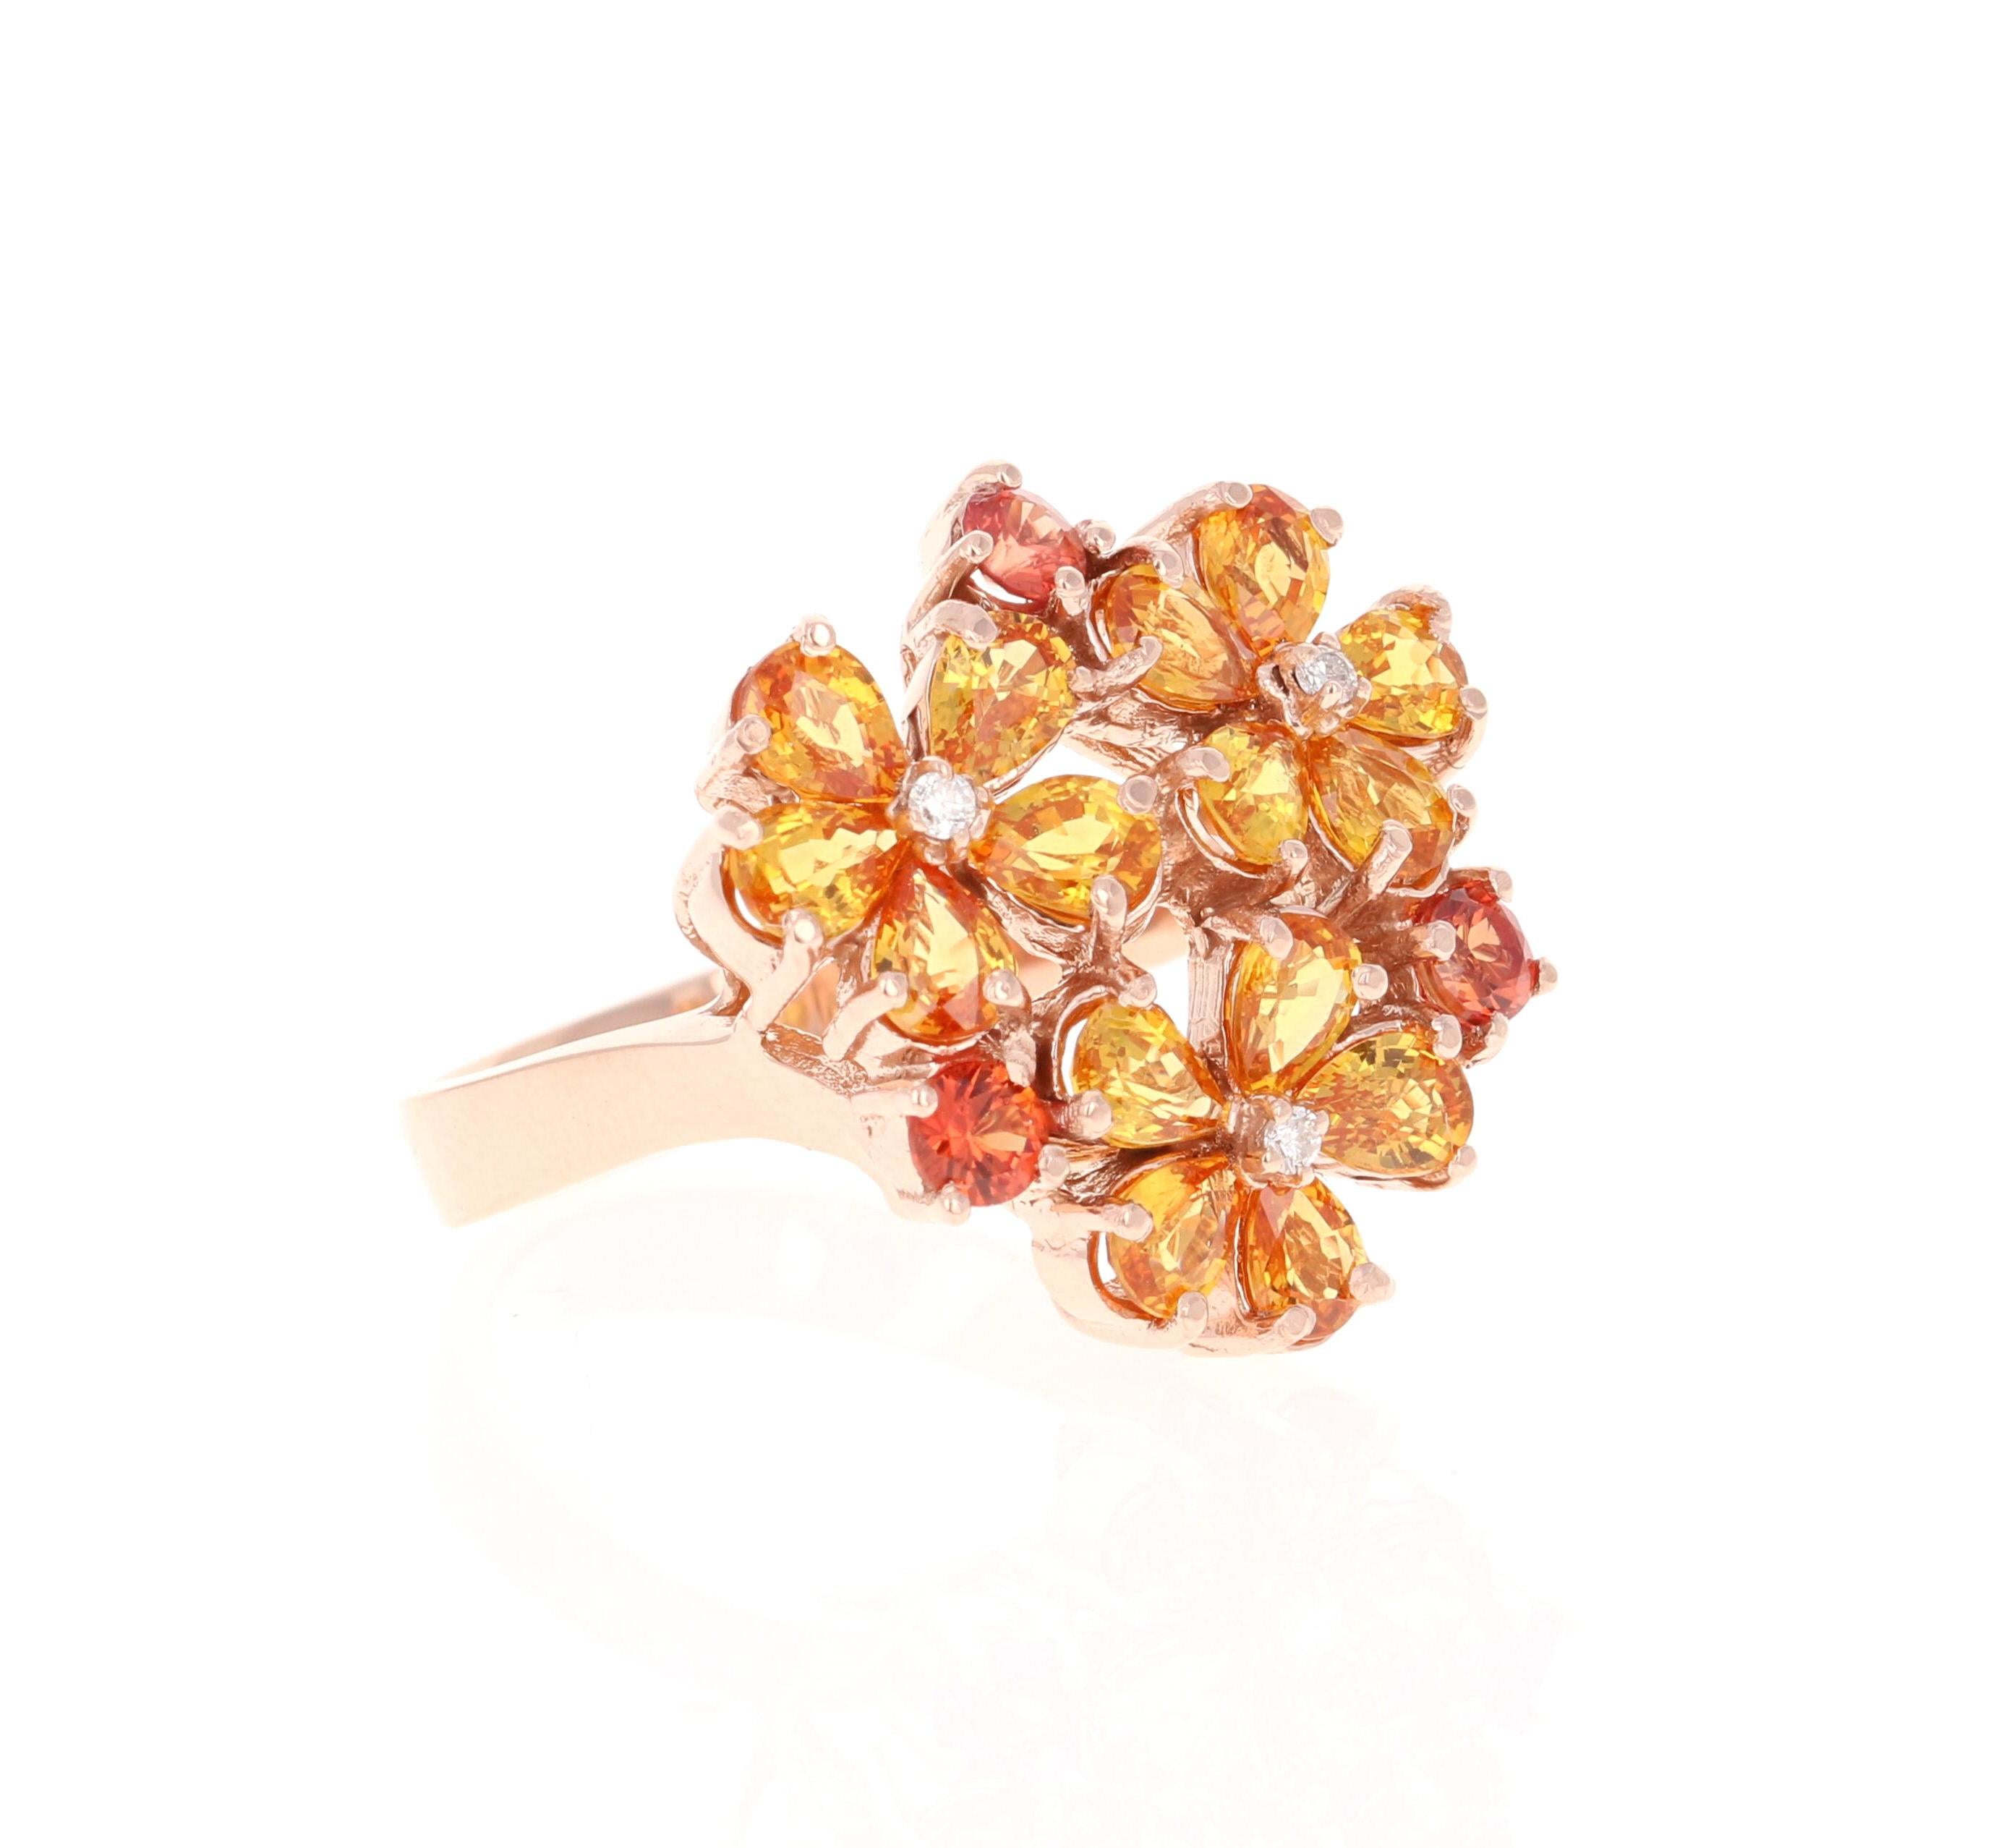 A Stunning and Unique piece to say the least!   Our in-house designer is carefully curated this ring to make it look like the most beautiful flower!

This ring has 15 Pear Cut Yellow Sapphires that weigh 2.71 Carats and 3 Round Red Sapphires that